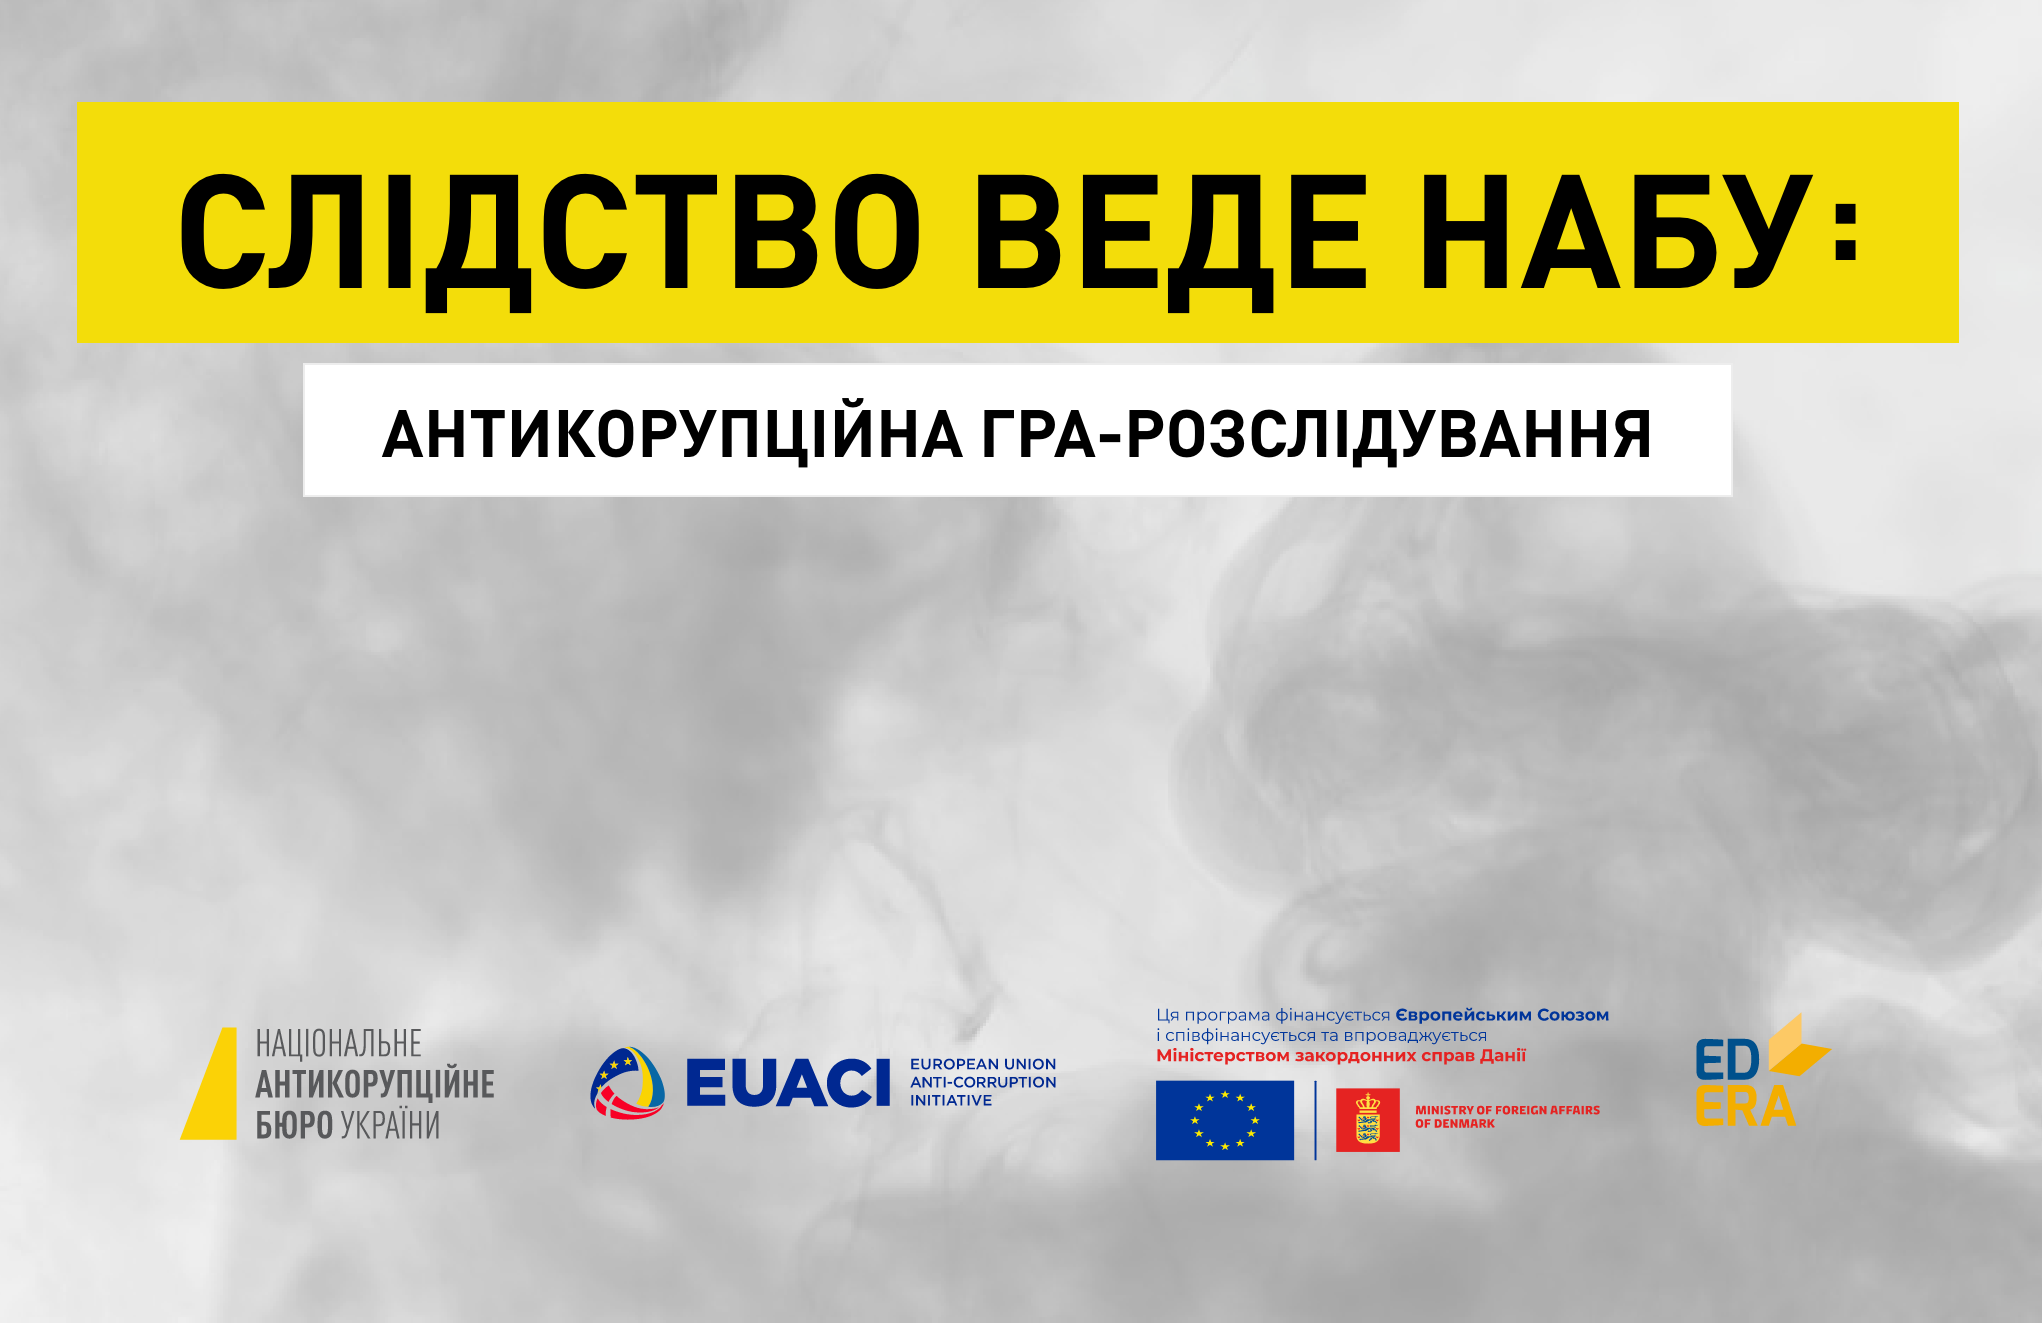 EUACI supported NABU in creation of anti-corruption interactive online course